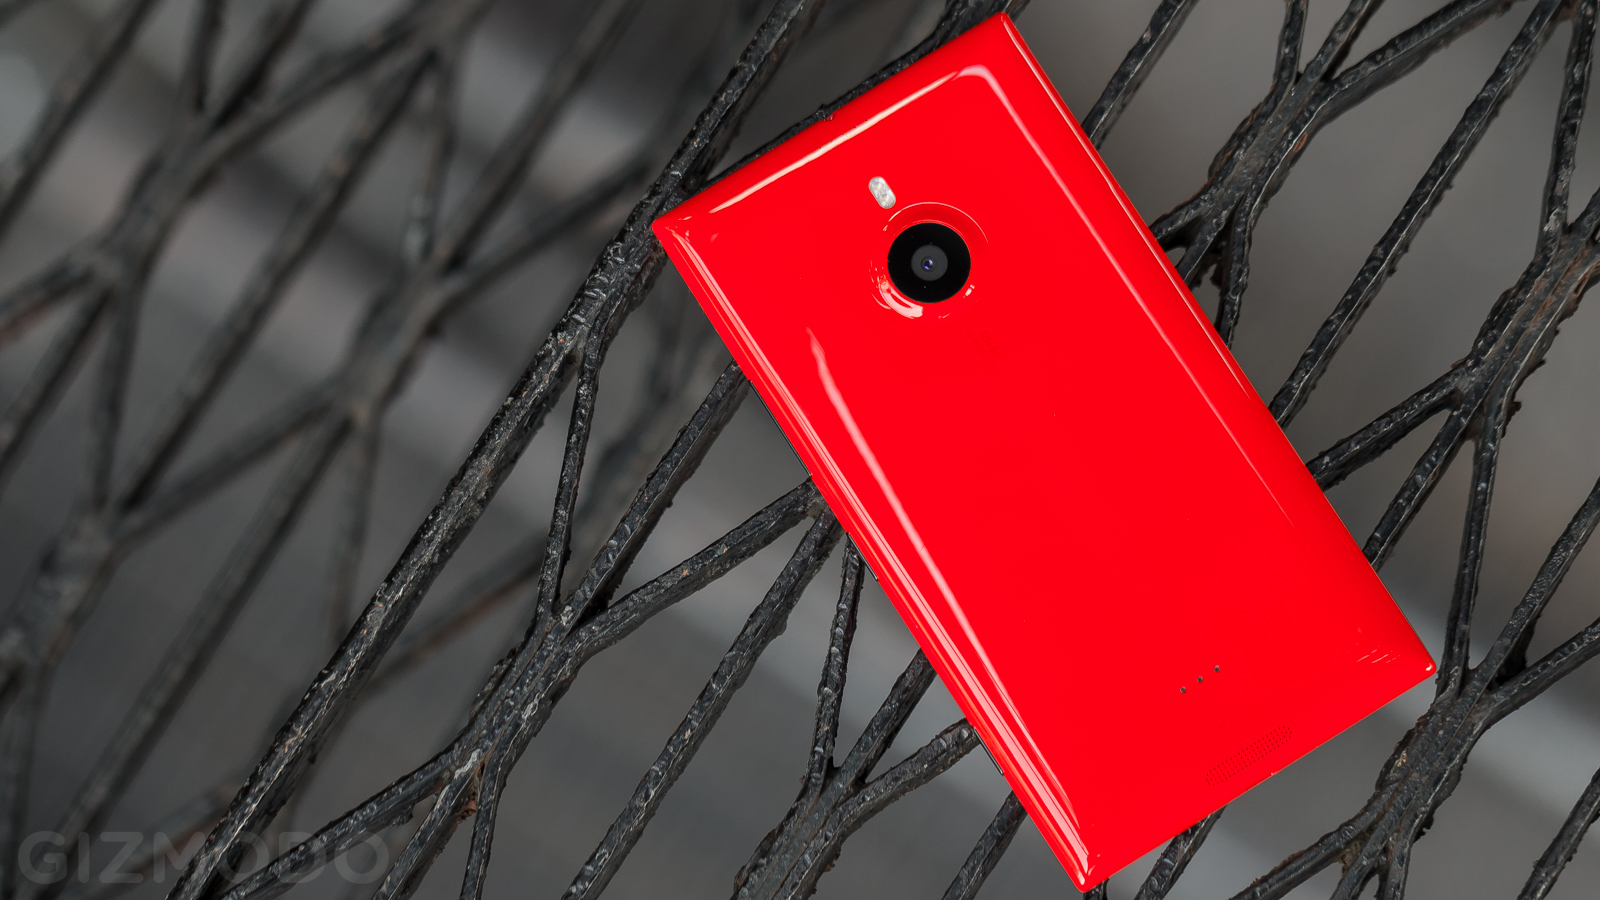 Nokia Lumia 1520 Review: A Burden In My Hand